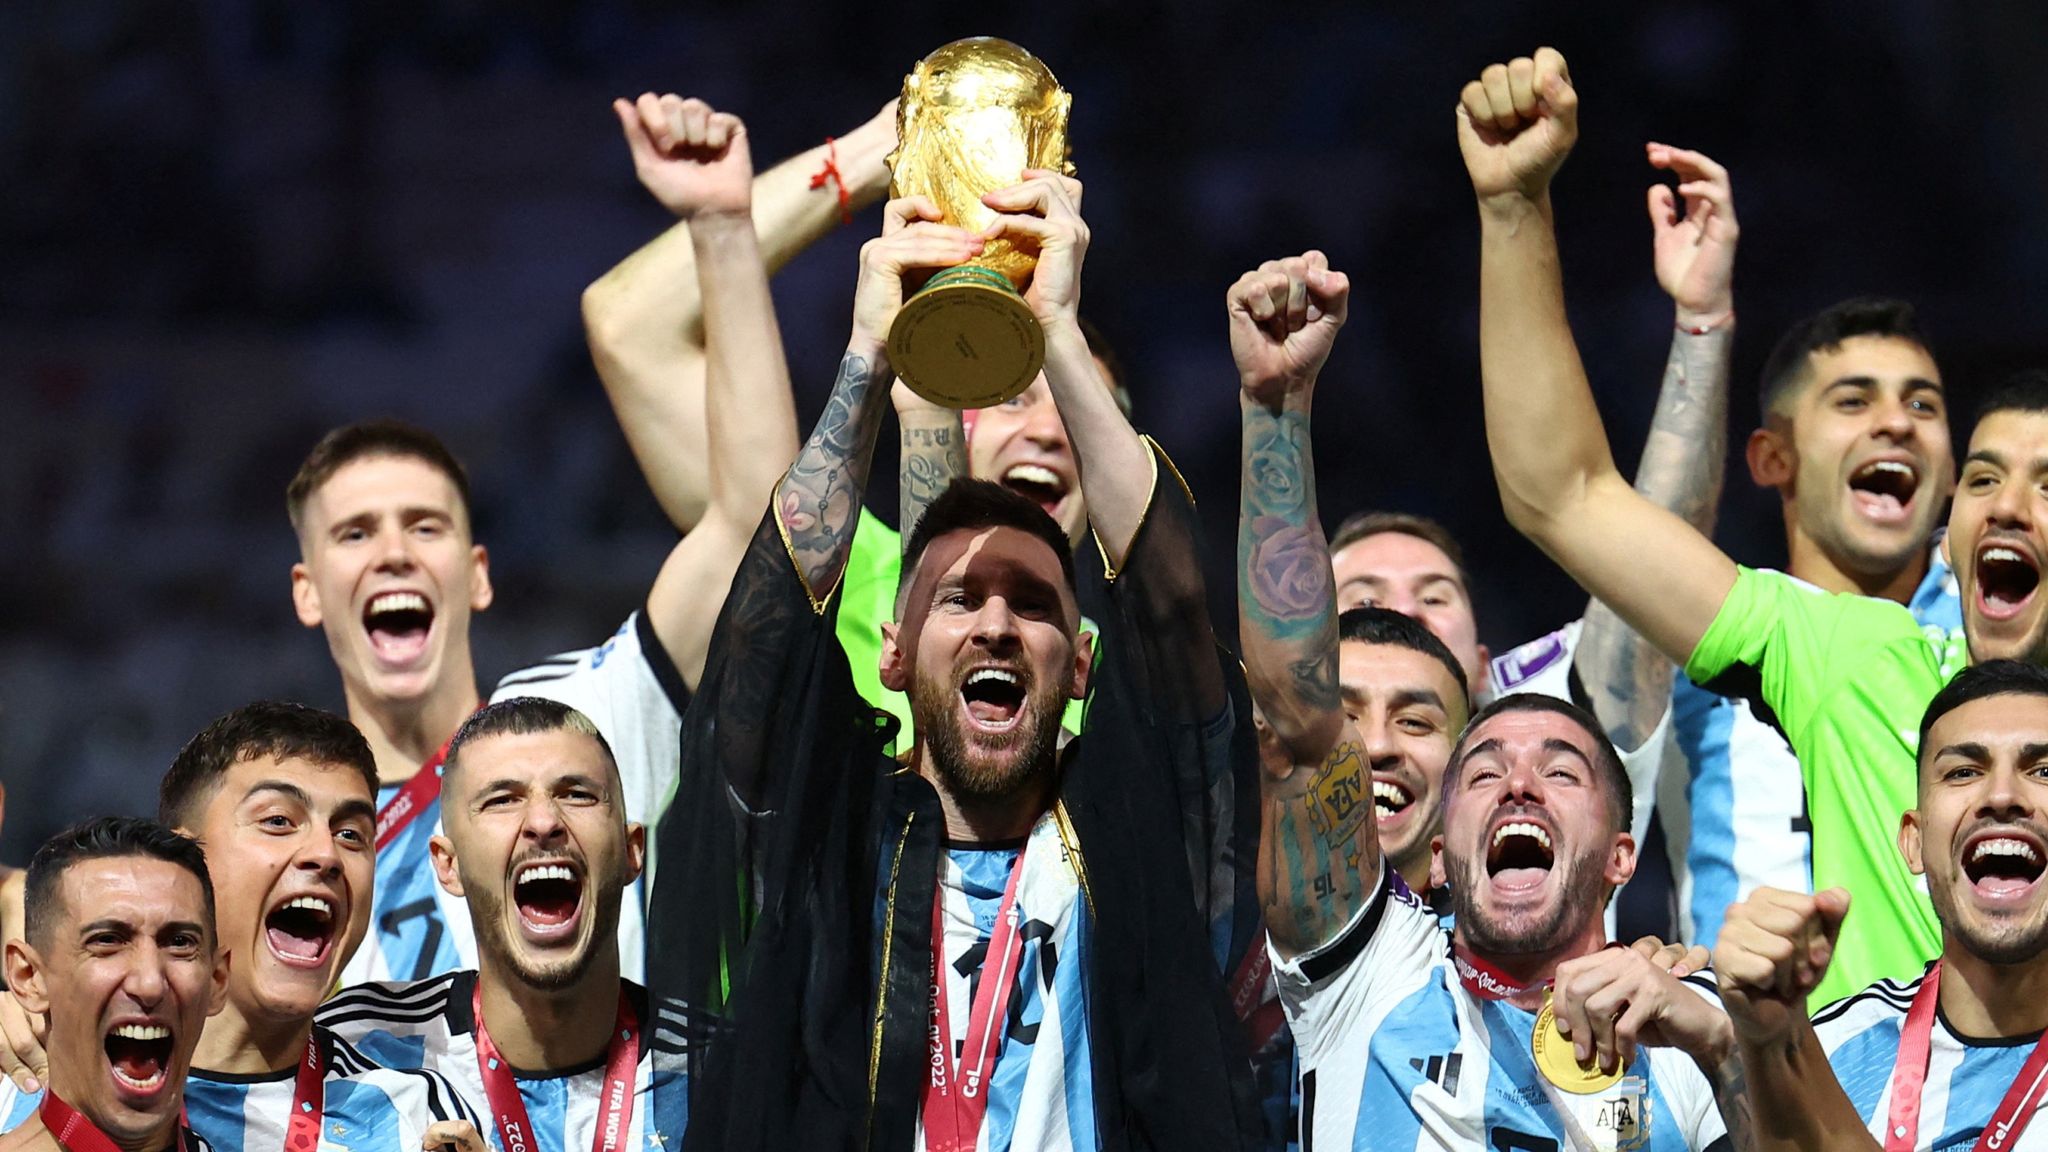 FIFA World Cup to have 104 matches in 2026, World News